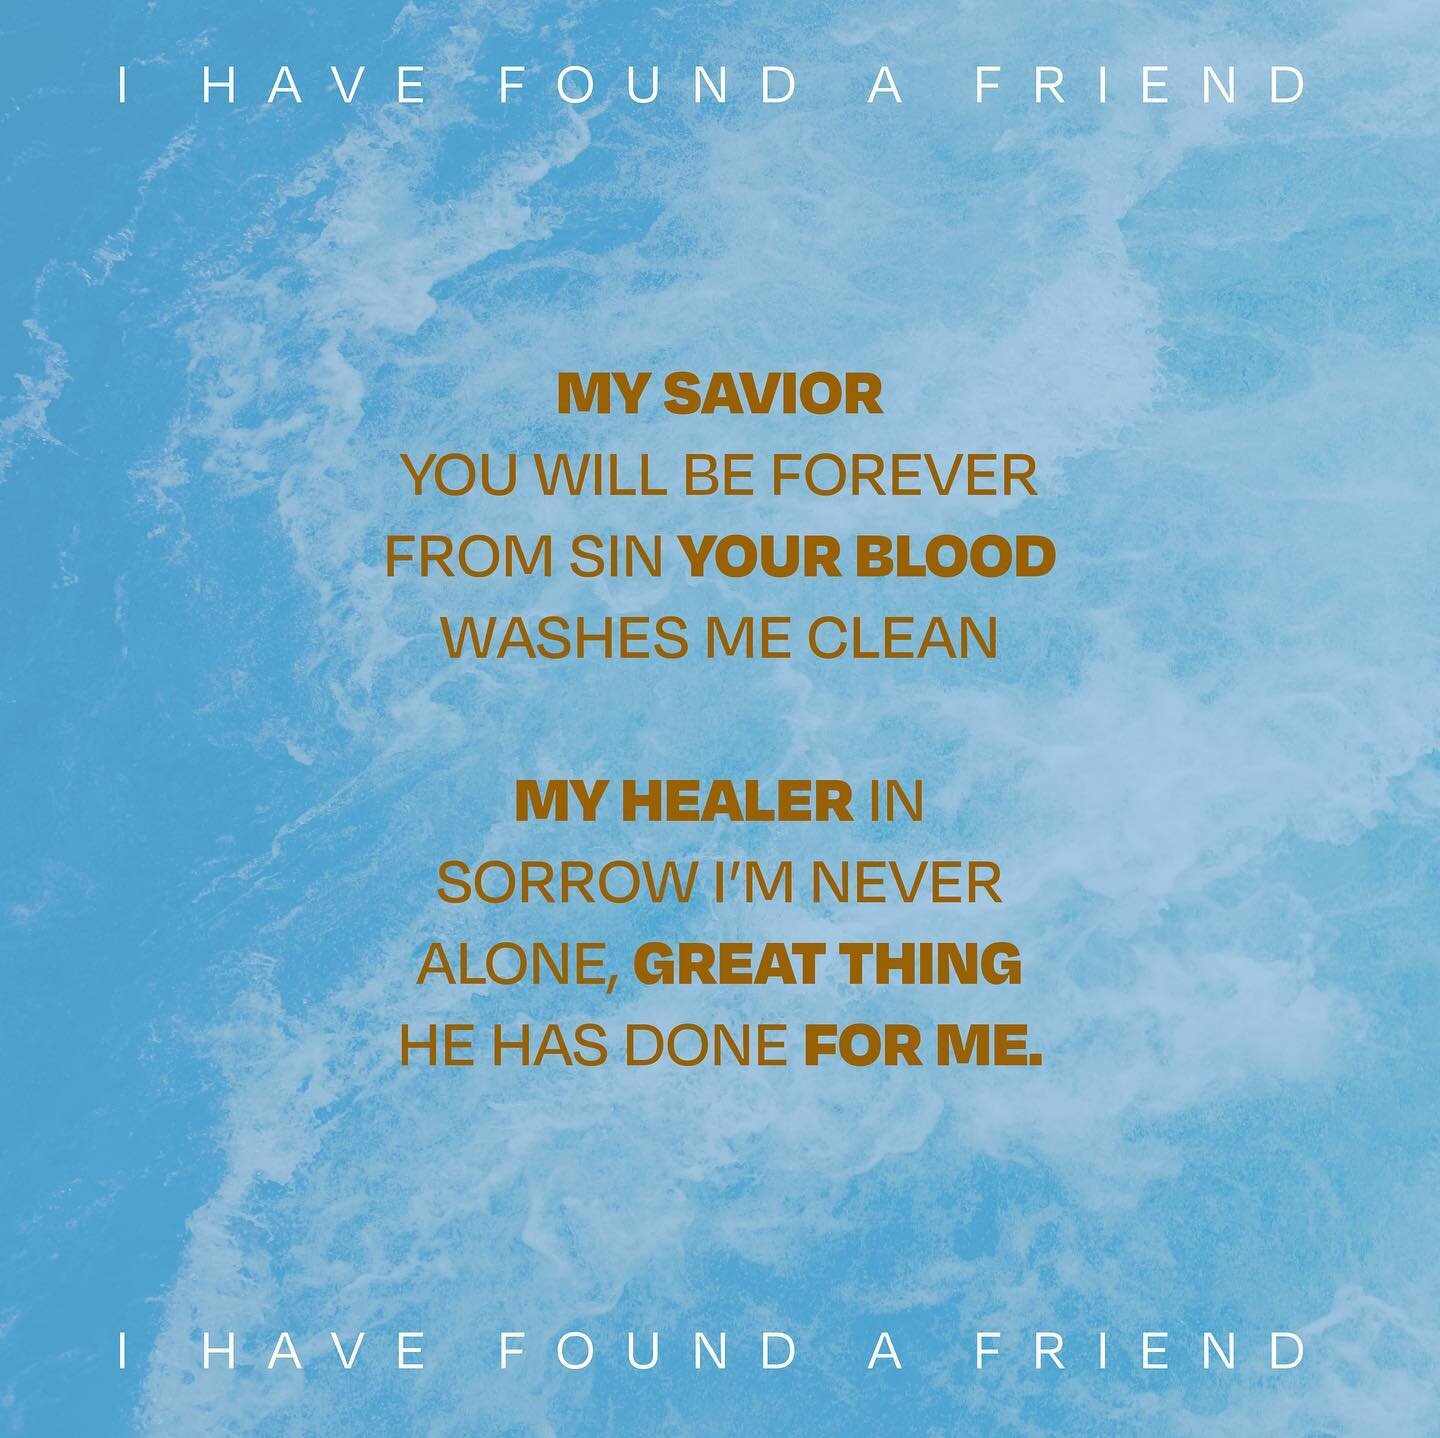 &ldquo;My savior you will be forever
from sin your blood washes me clean.
My healer in sorrow i&rsquo;m never
alone, great things he has done for me&rdquo;

🇺🇸What do the lyrics from &ldquo;I have found a Friend&rdquo;?
🇪🇸 &iquest;Qué significa 